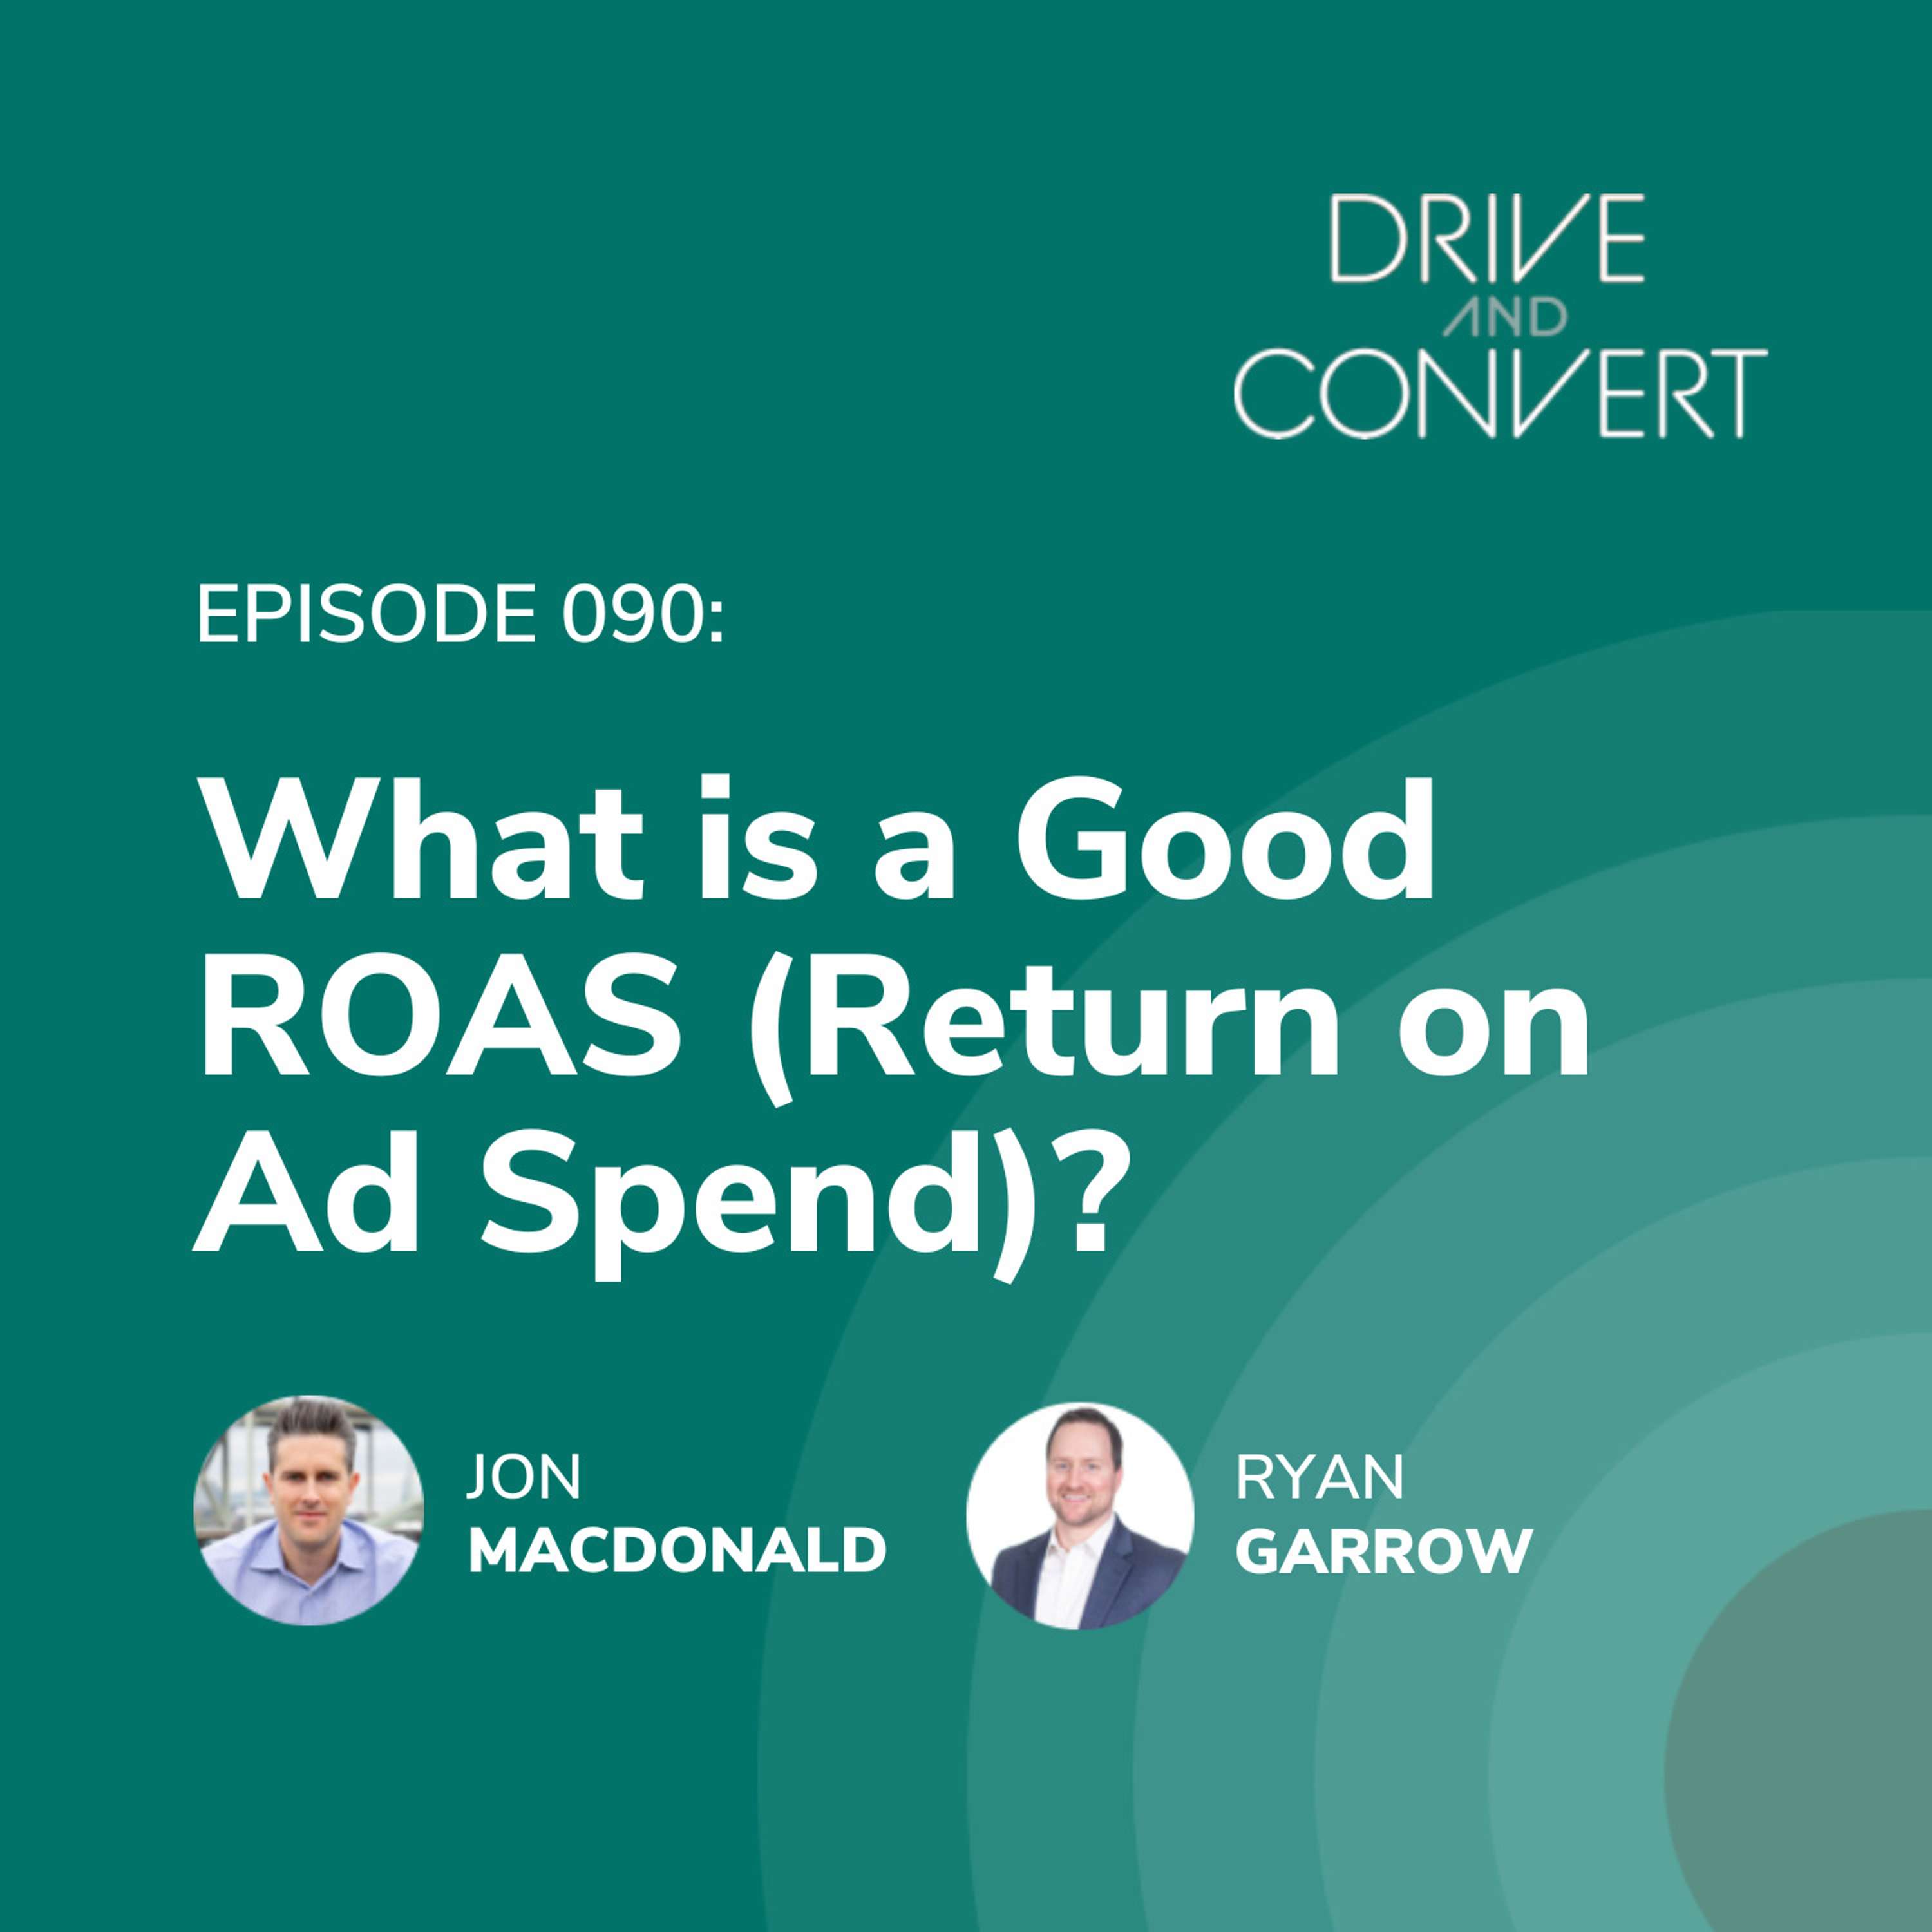 Episode 90: What is a Good ROAS (Return on Ad Spend)?